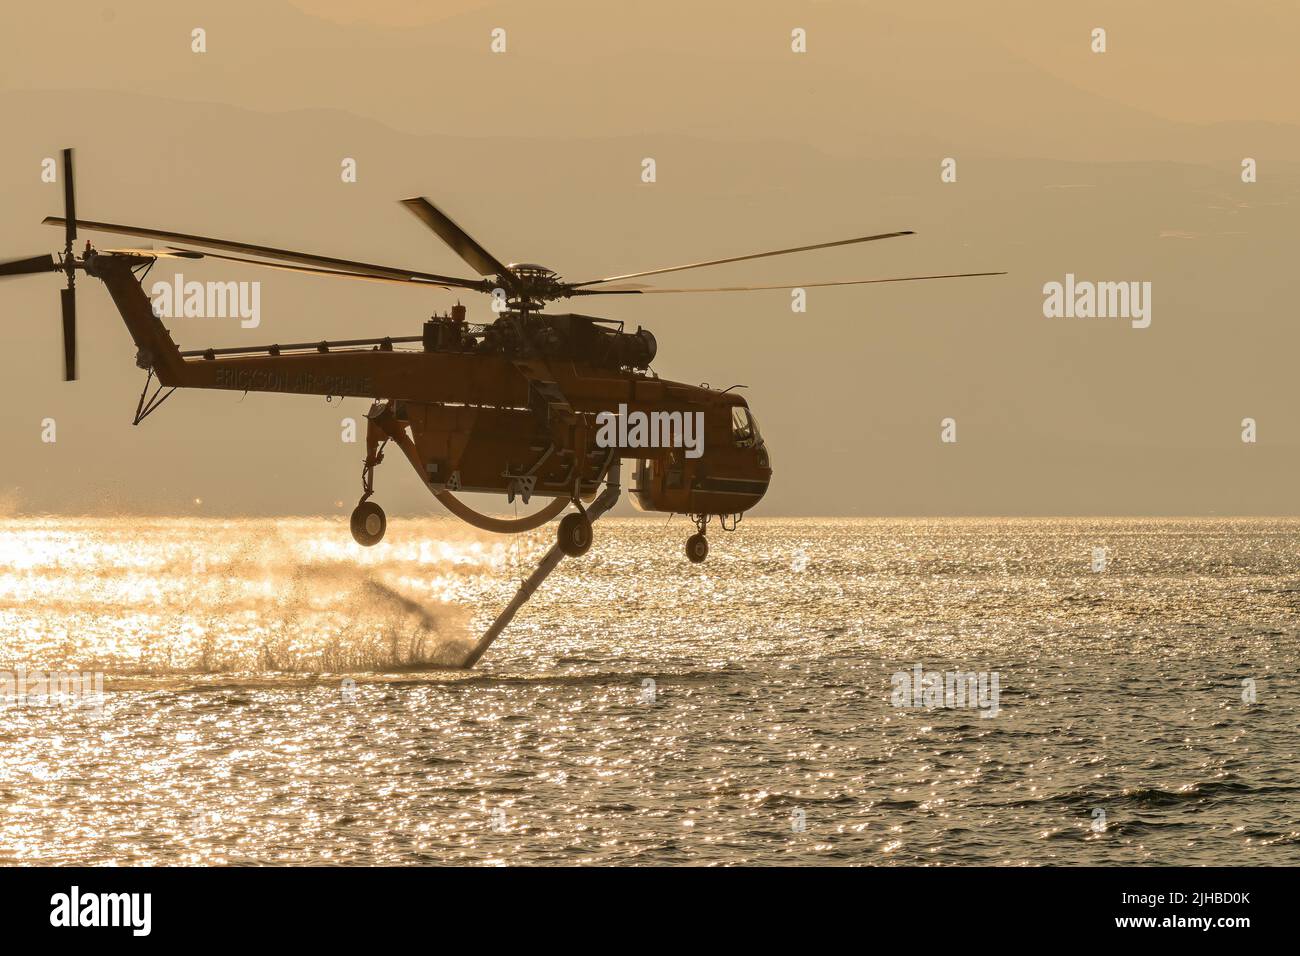 Loutraki, Greece 14 September 2019. Fire helicopter at Loutraki in Greece for the big fire gathering water against the sunset. Stock Photo